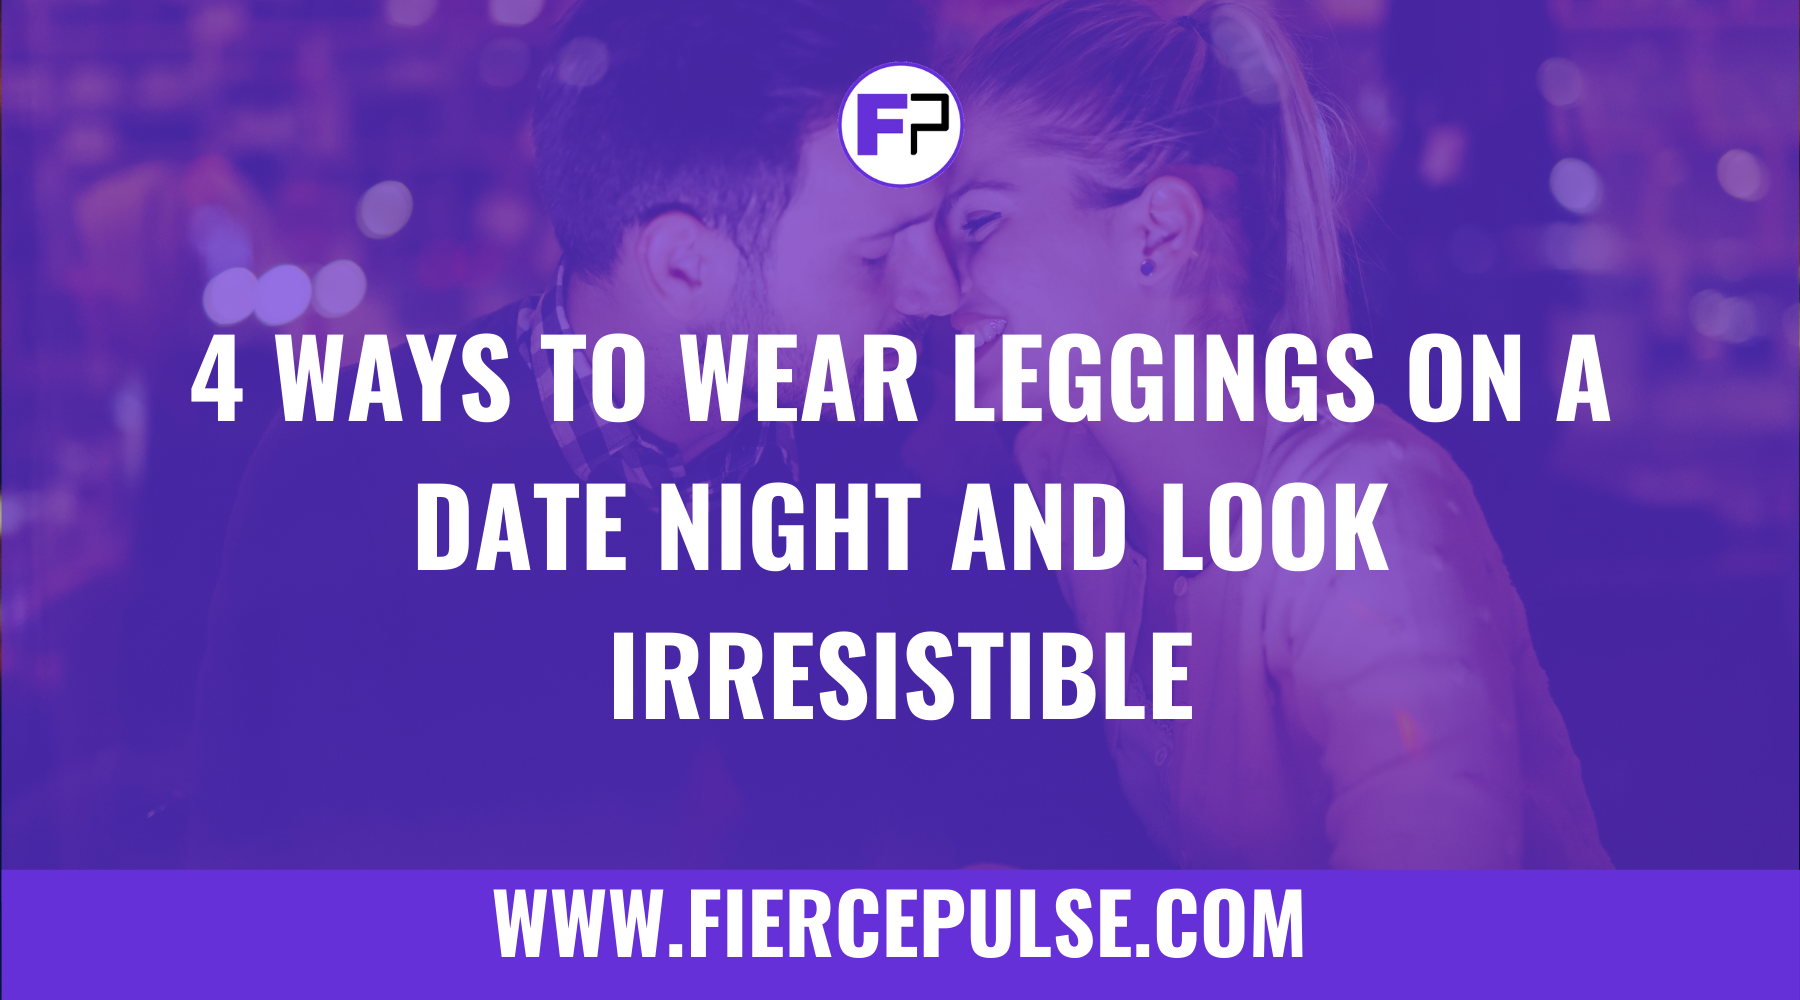 4 Ways To Wear Leggings On A Date Night And Look Irresistible